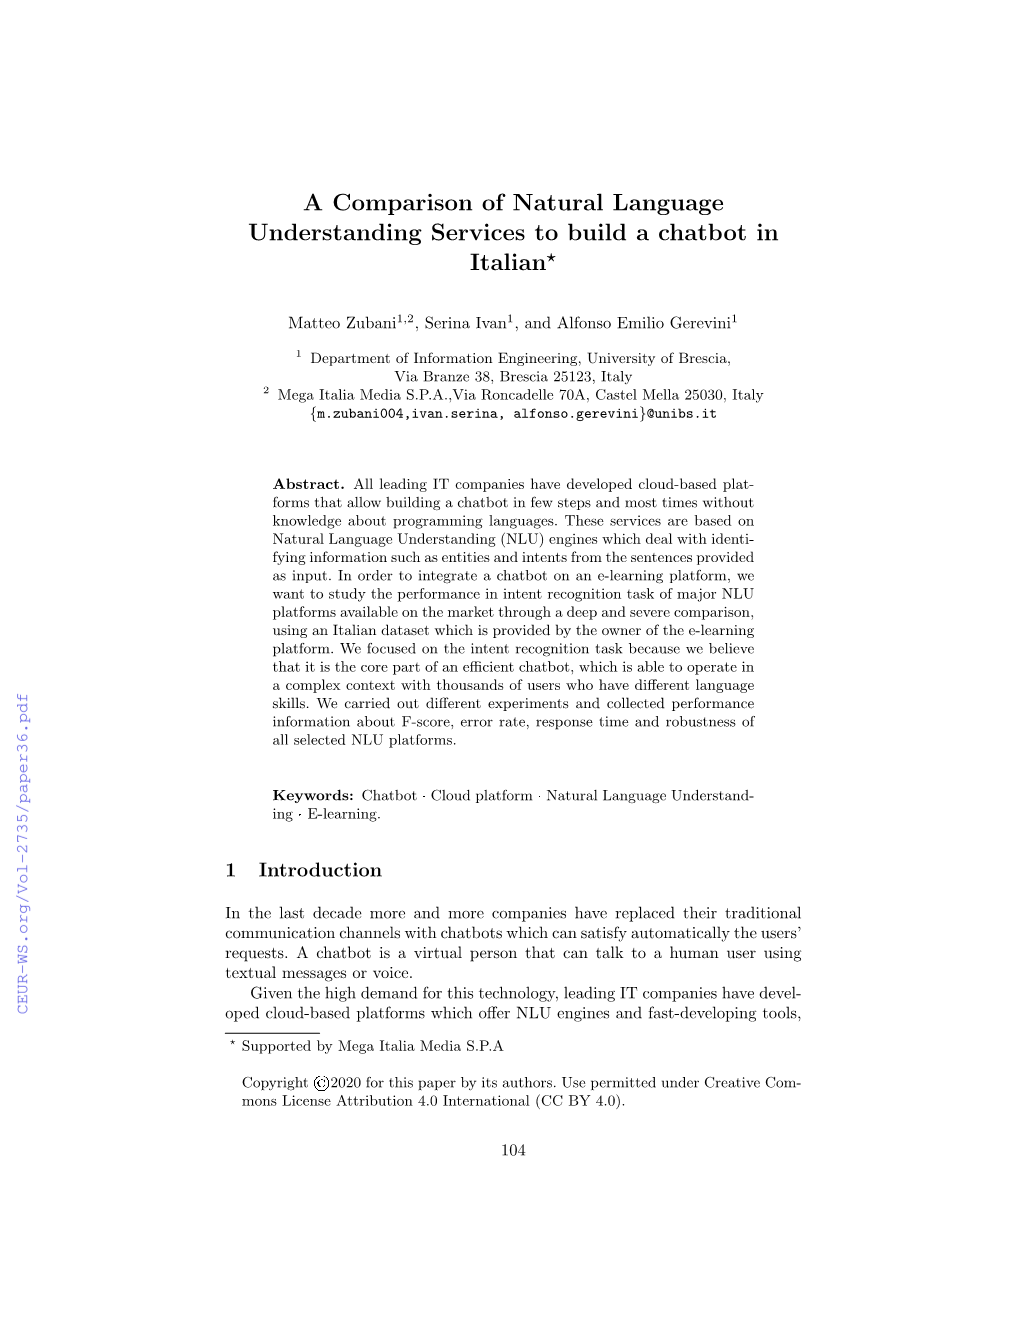 A Comparison of Natural Language Understanding Services to Build a Chatbot in Italian?